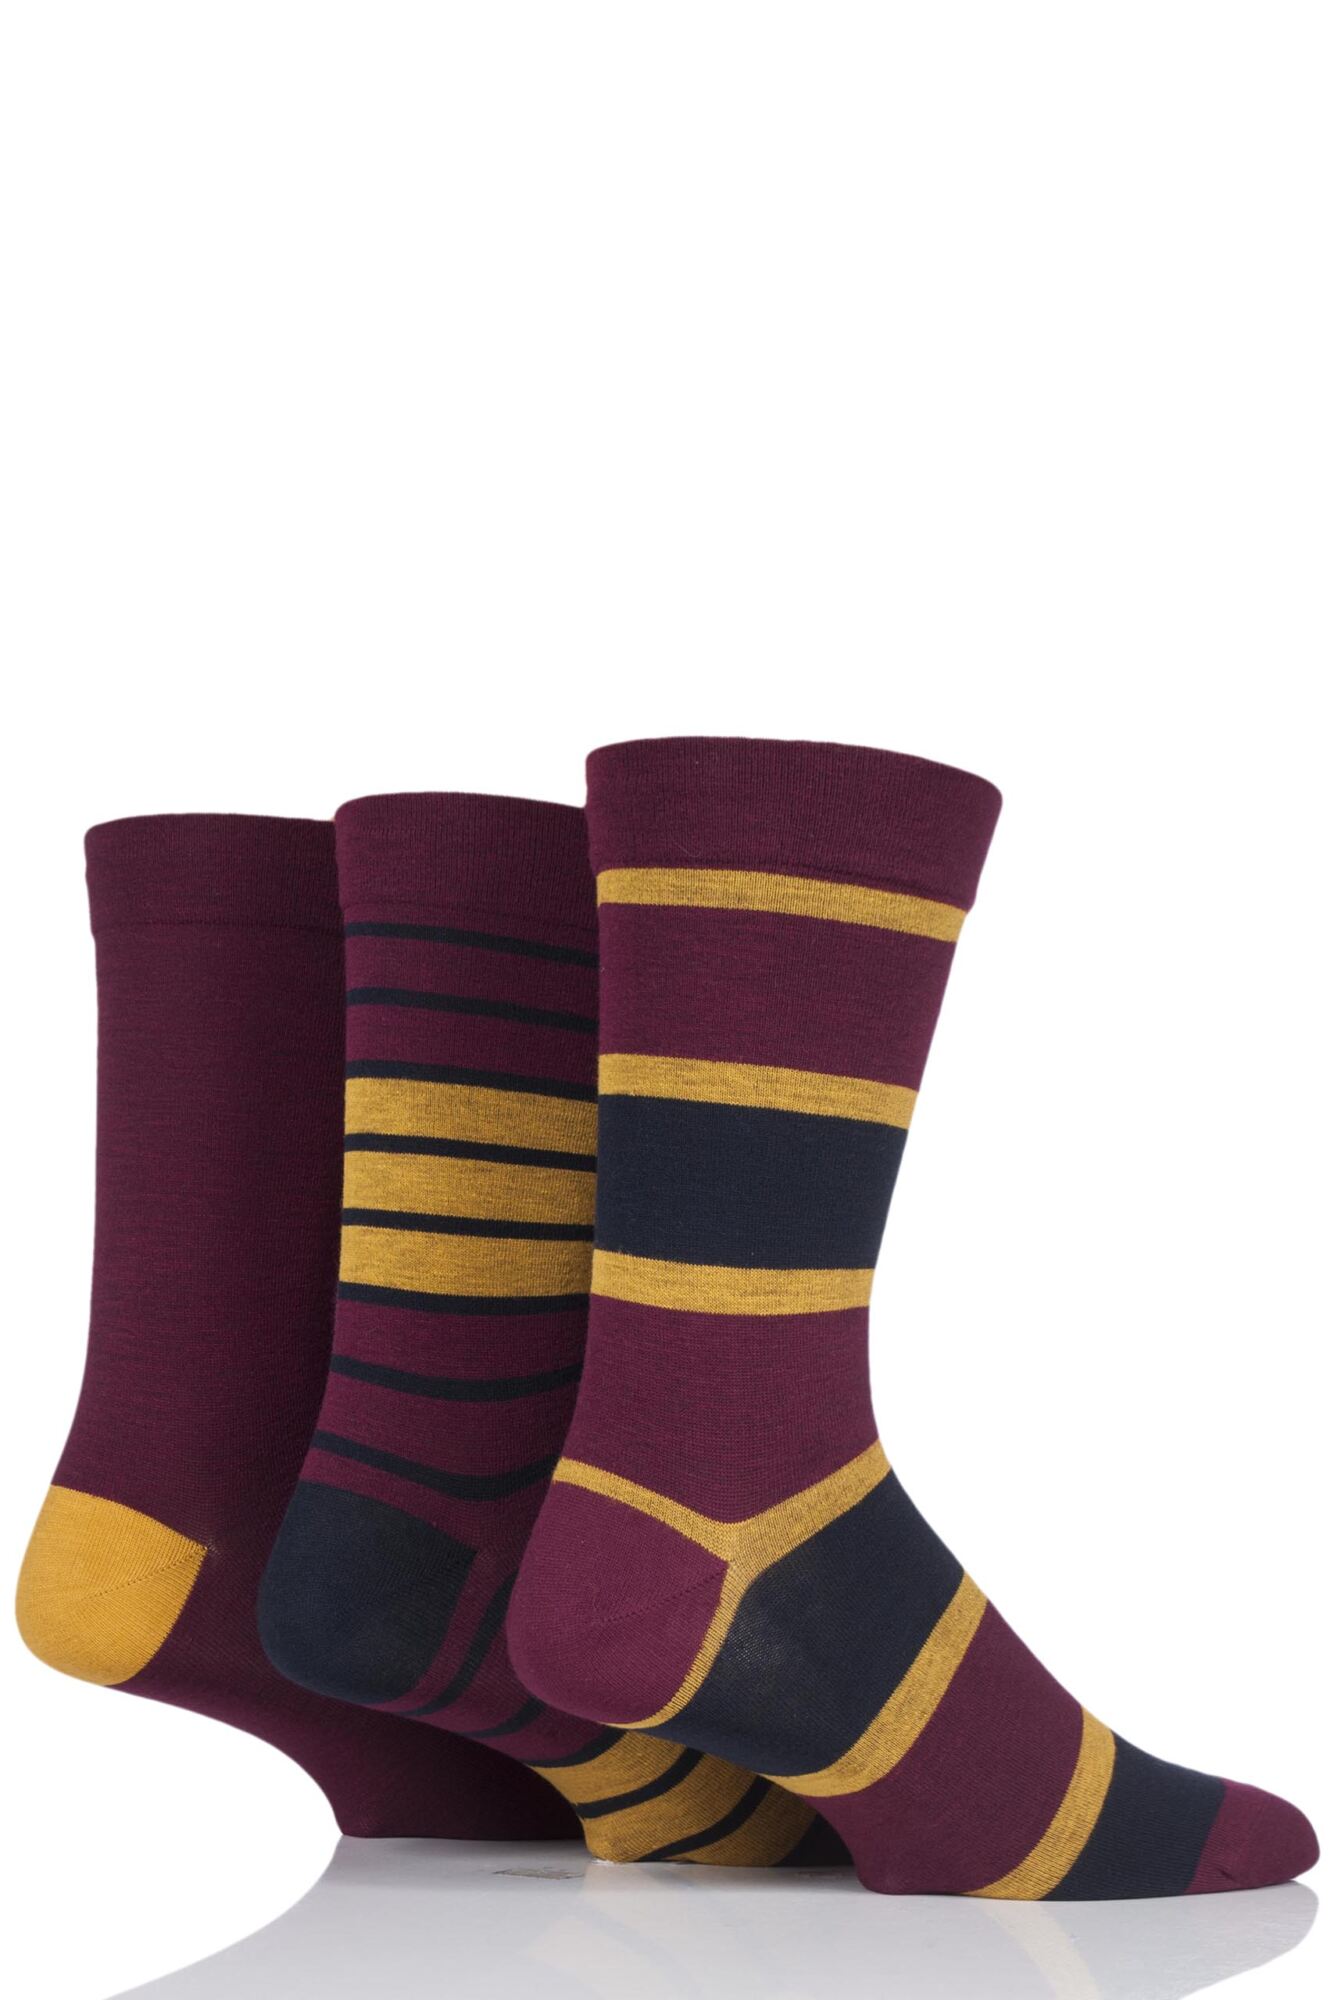 3 Pair Comfort Cuff Gentle Bamboo Striped Socks with Smooth Toe Seams Men's - SOCKSHOP